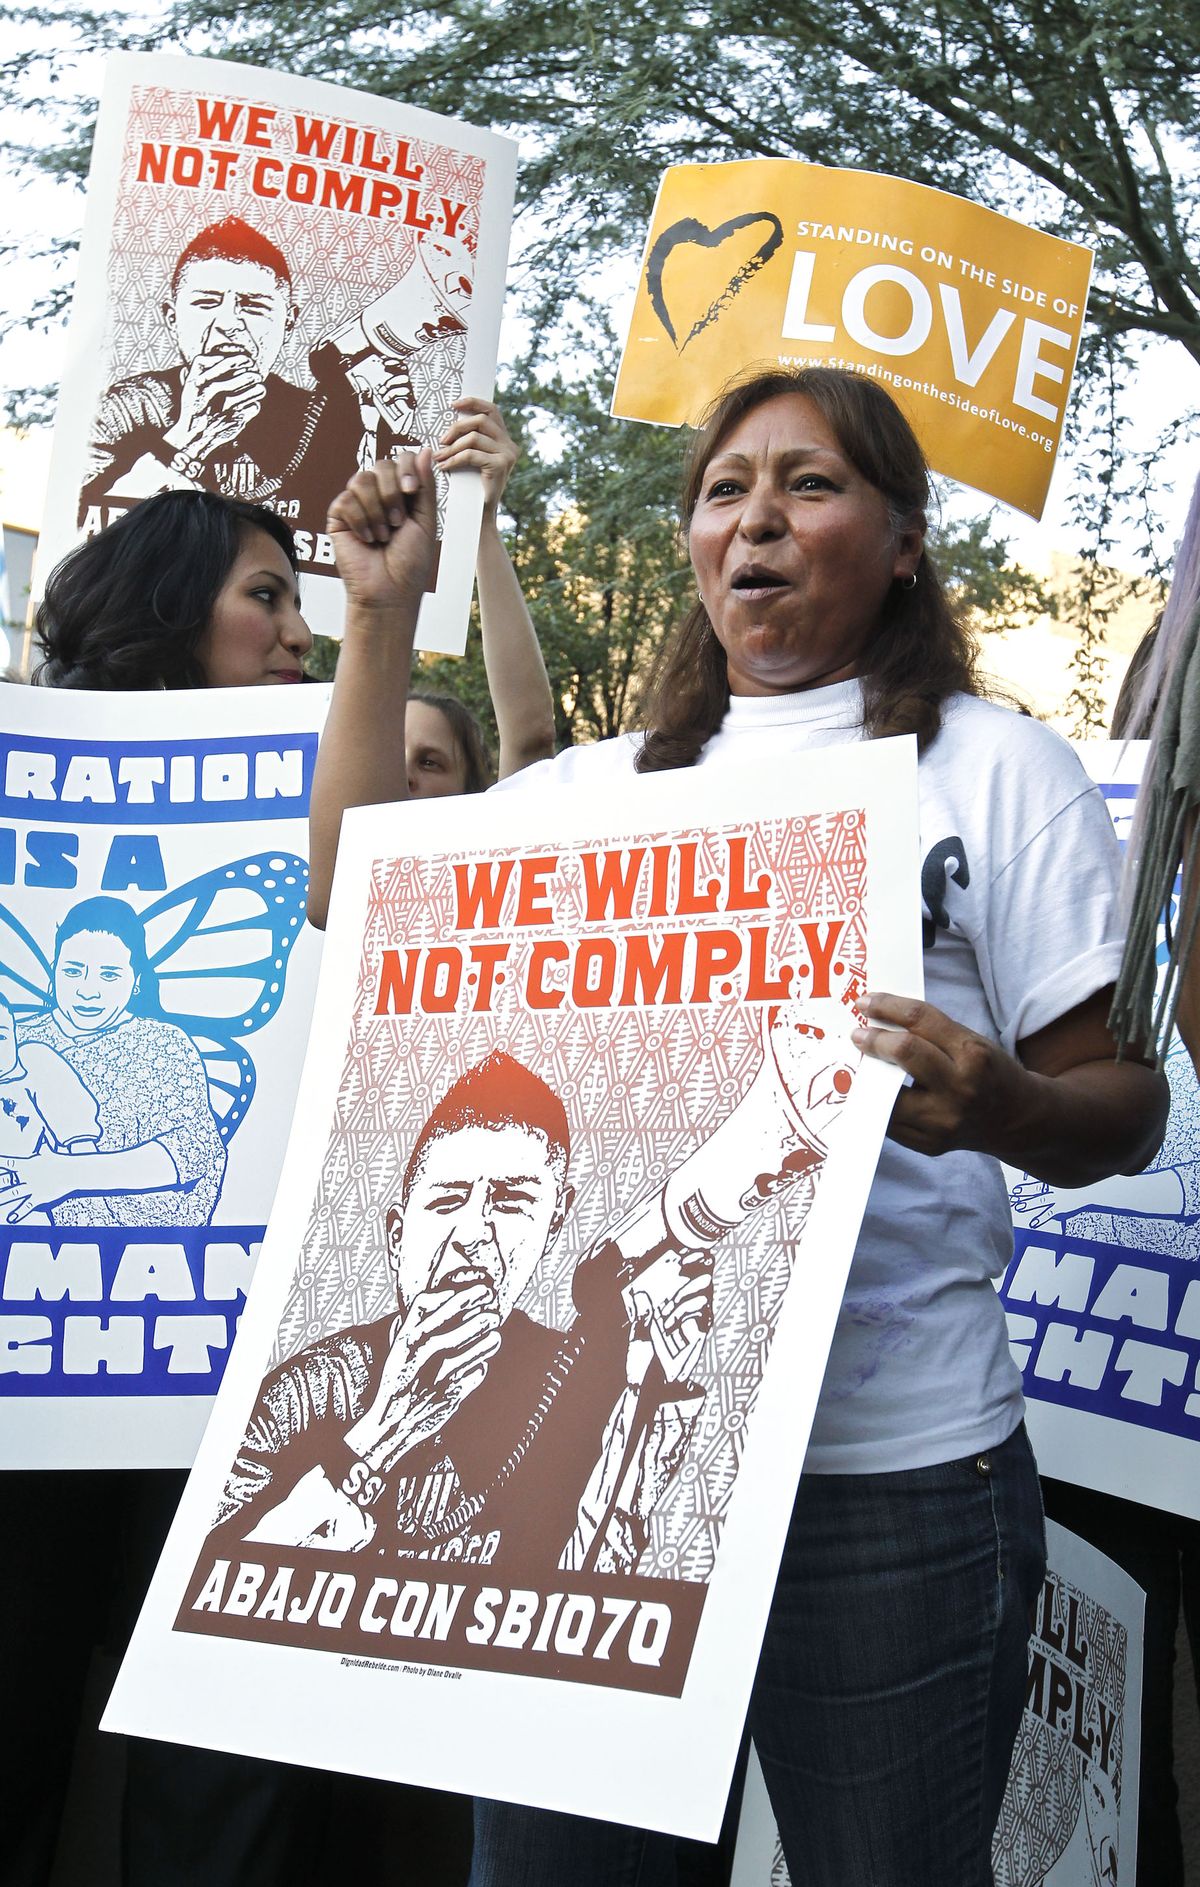 Maria Cruz chants as she joins dozens who rally in front of  U.S. Immigration and Customs Enforcement building, a day after a portion of Arizona